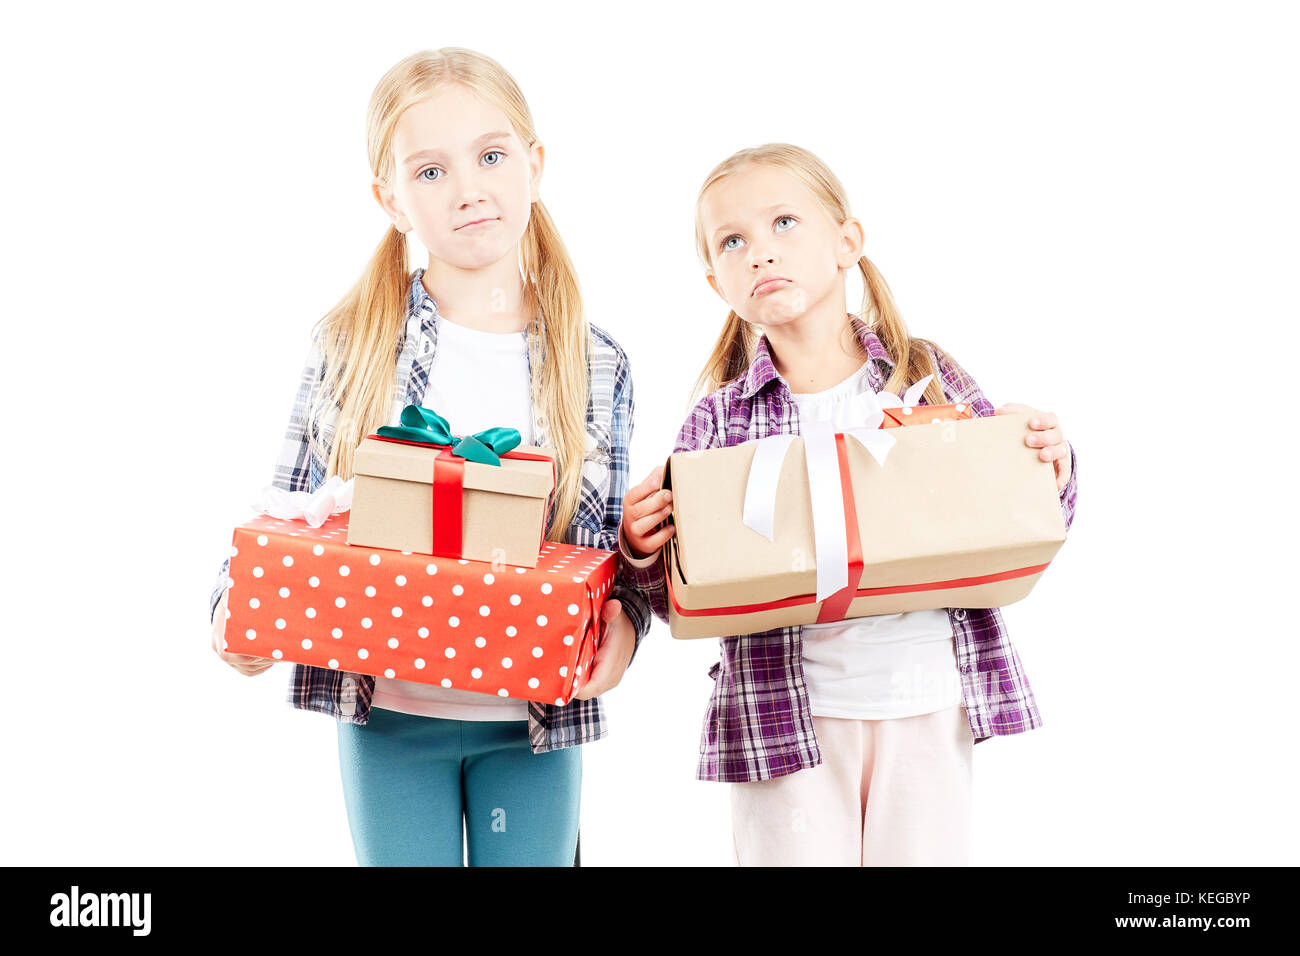 Sisters with Christmas gifts Stock Photo